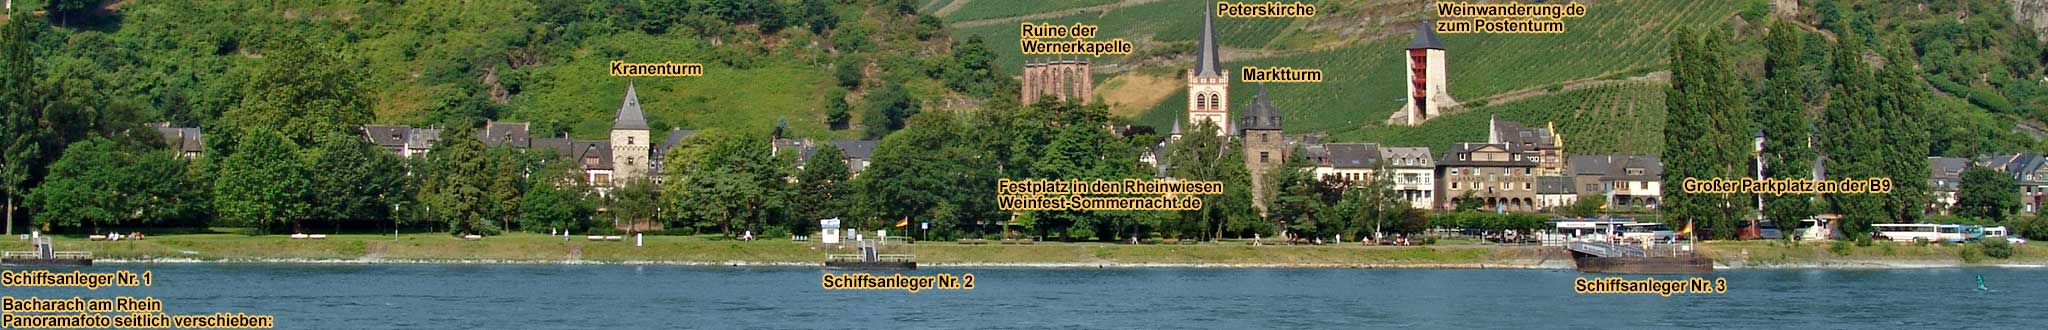 Panorama picture of Bacharach on the Rhine River with boat landing stages